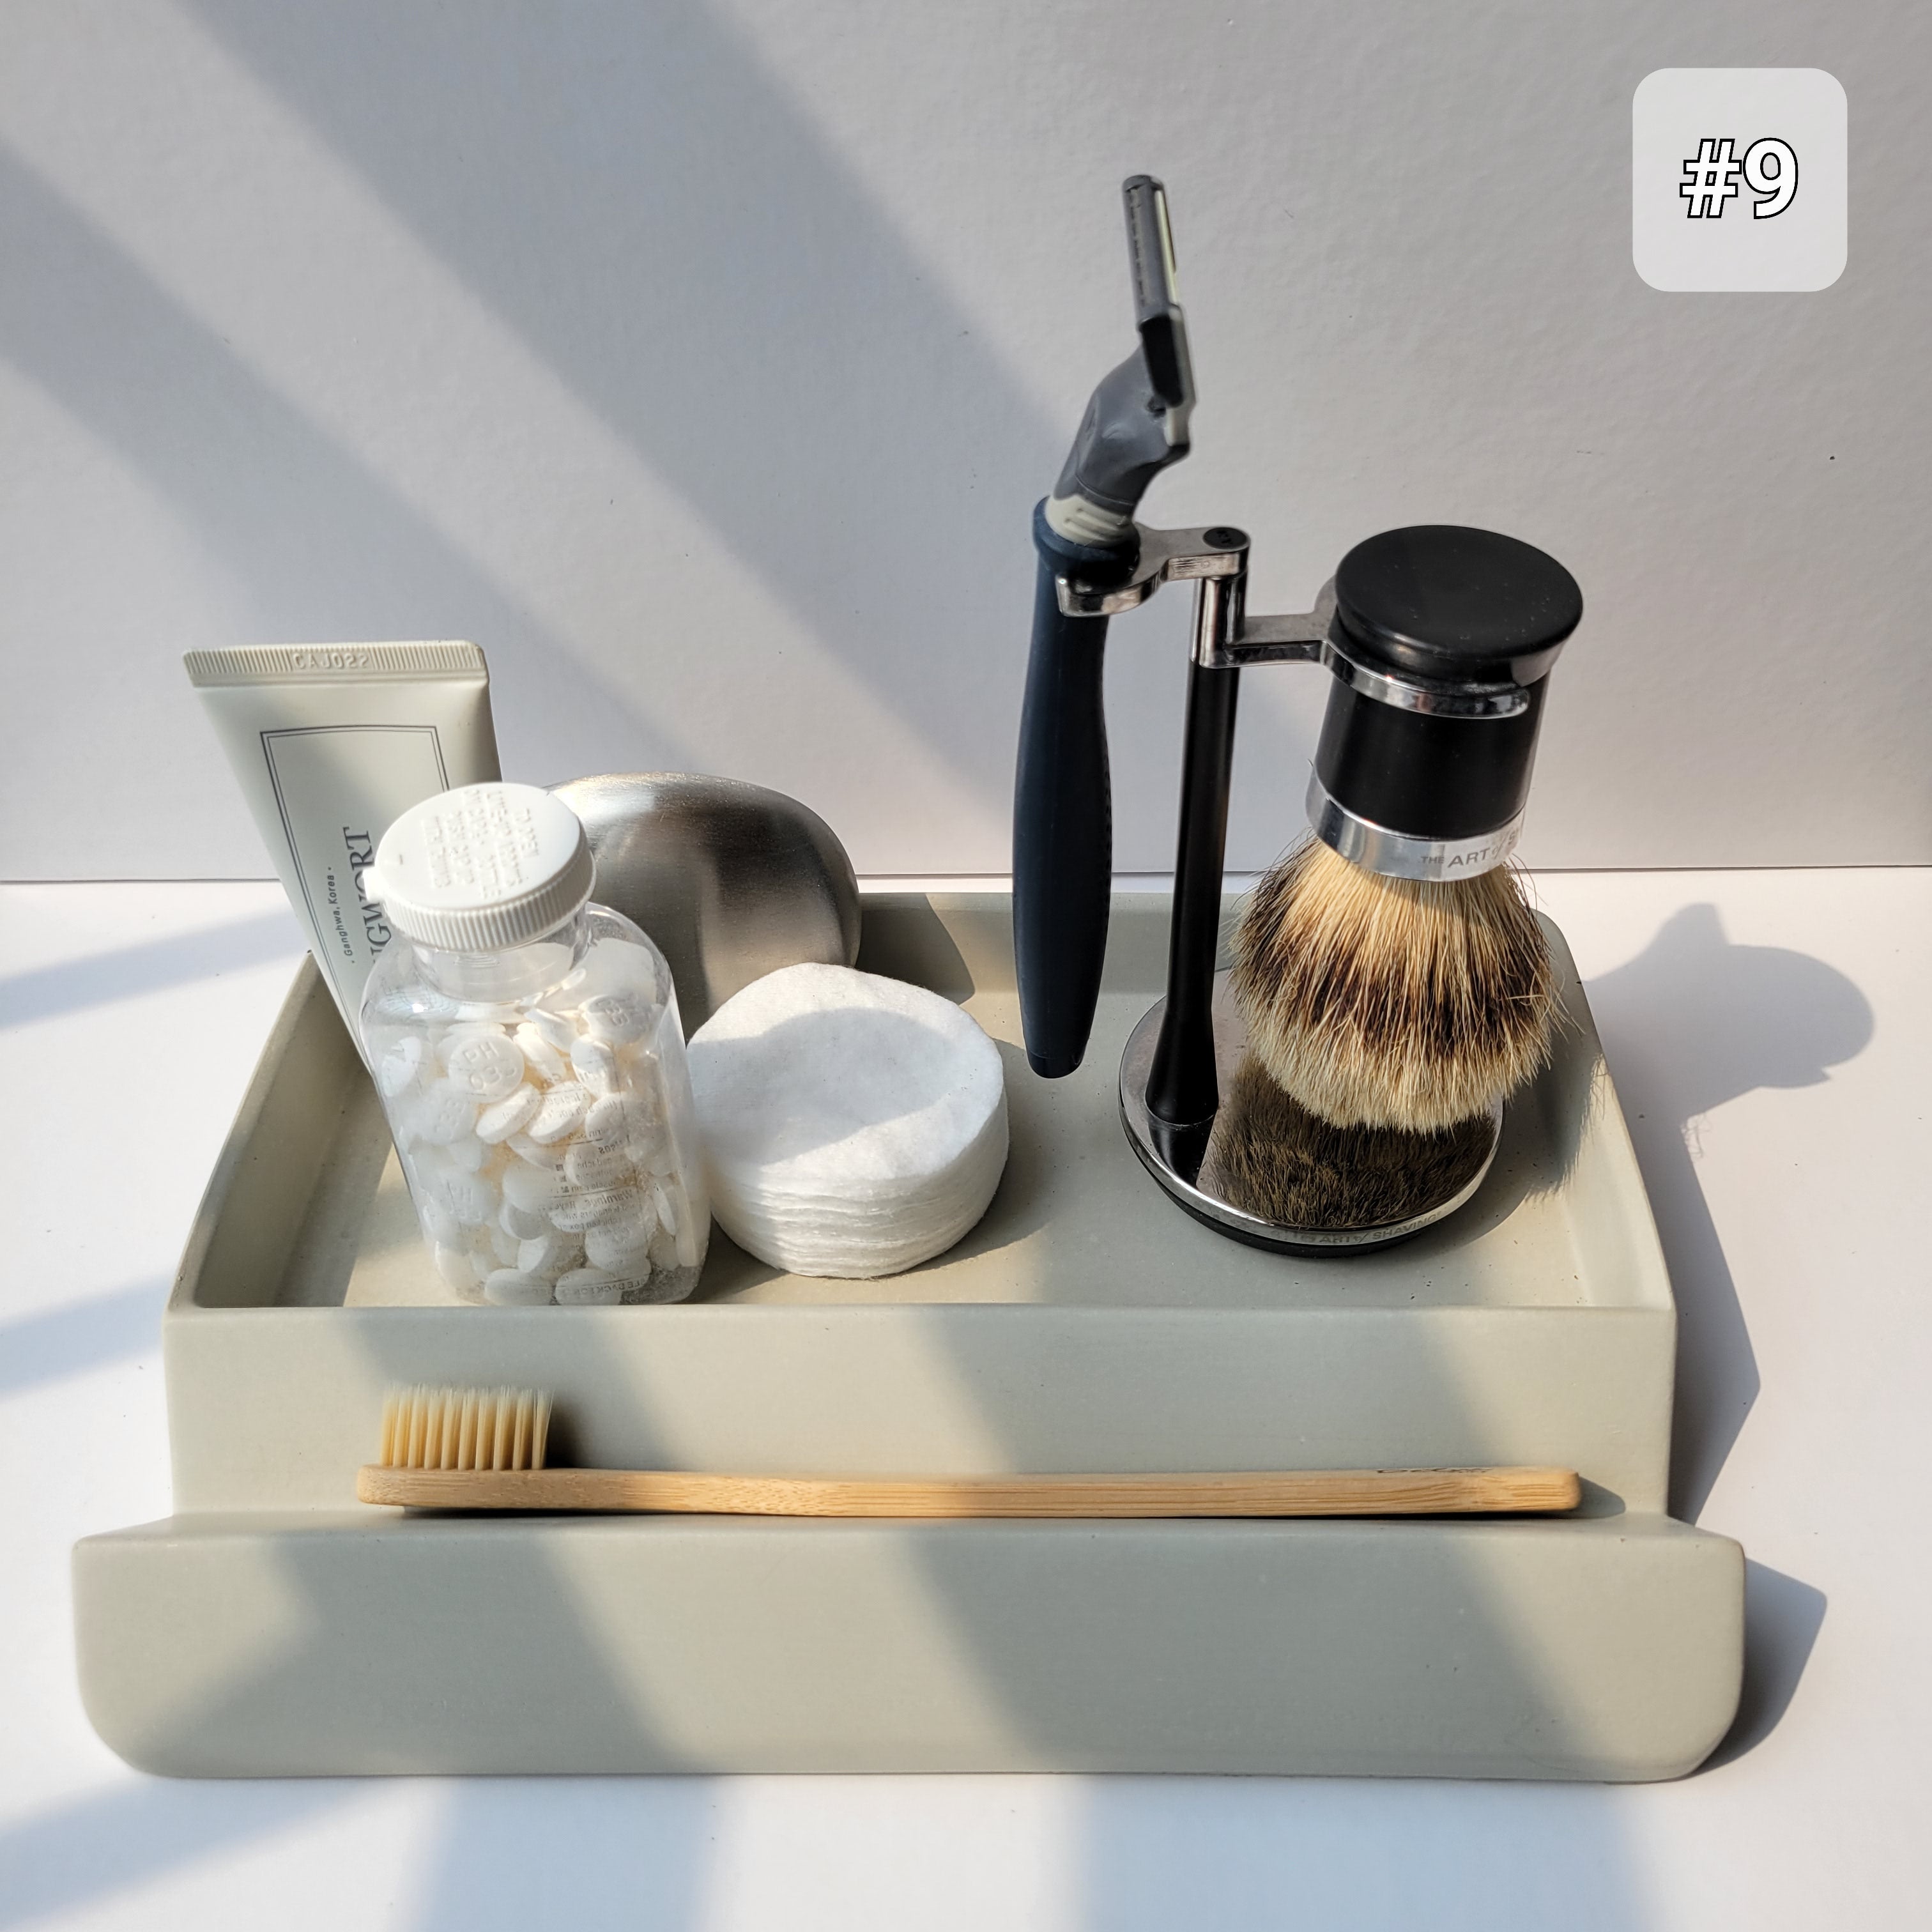 Object #9 - Toiletries Counter Display